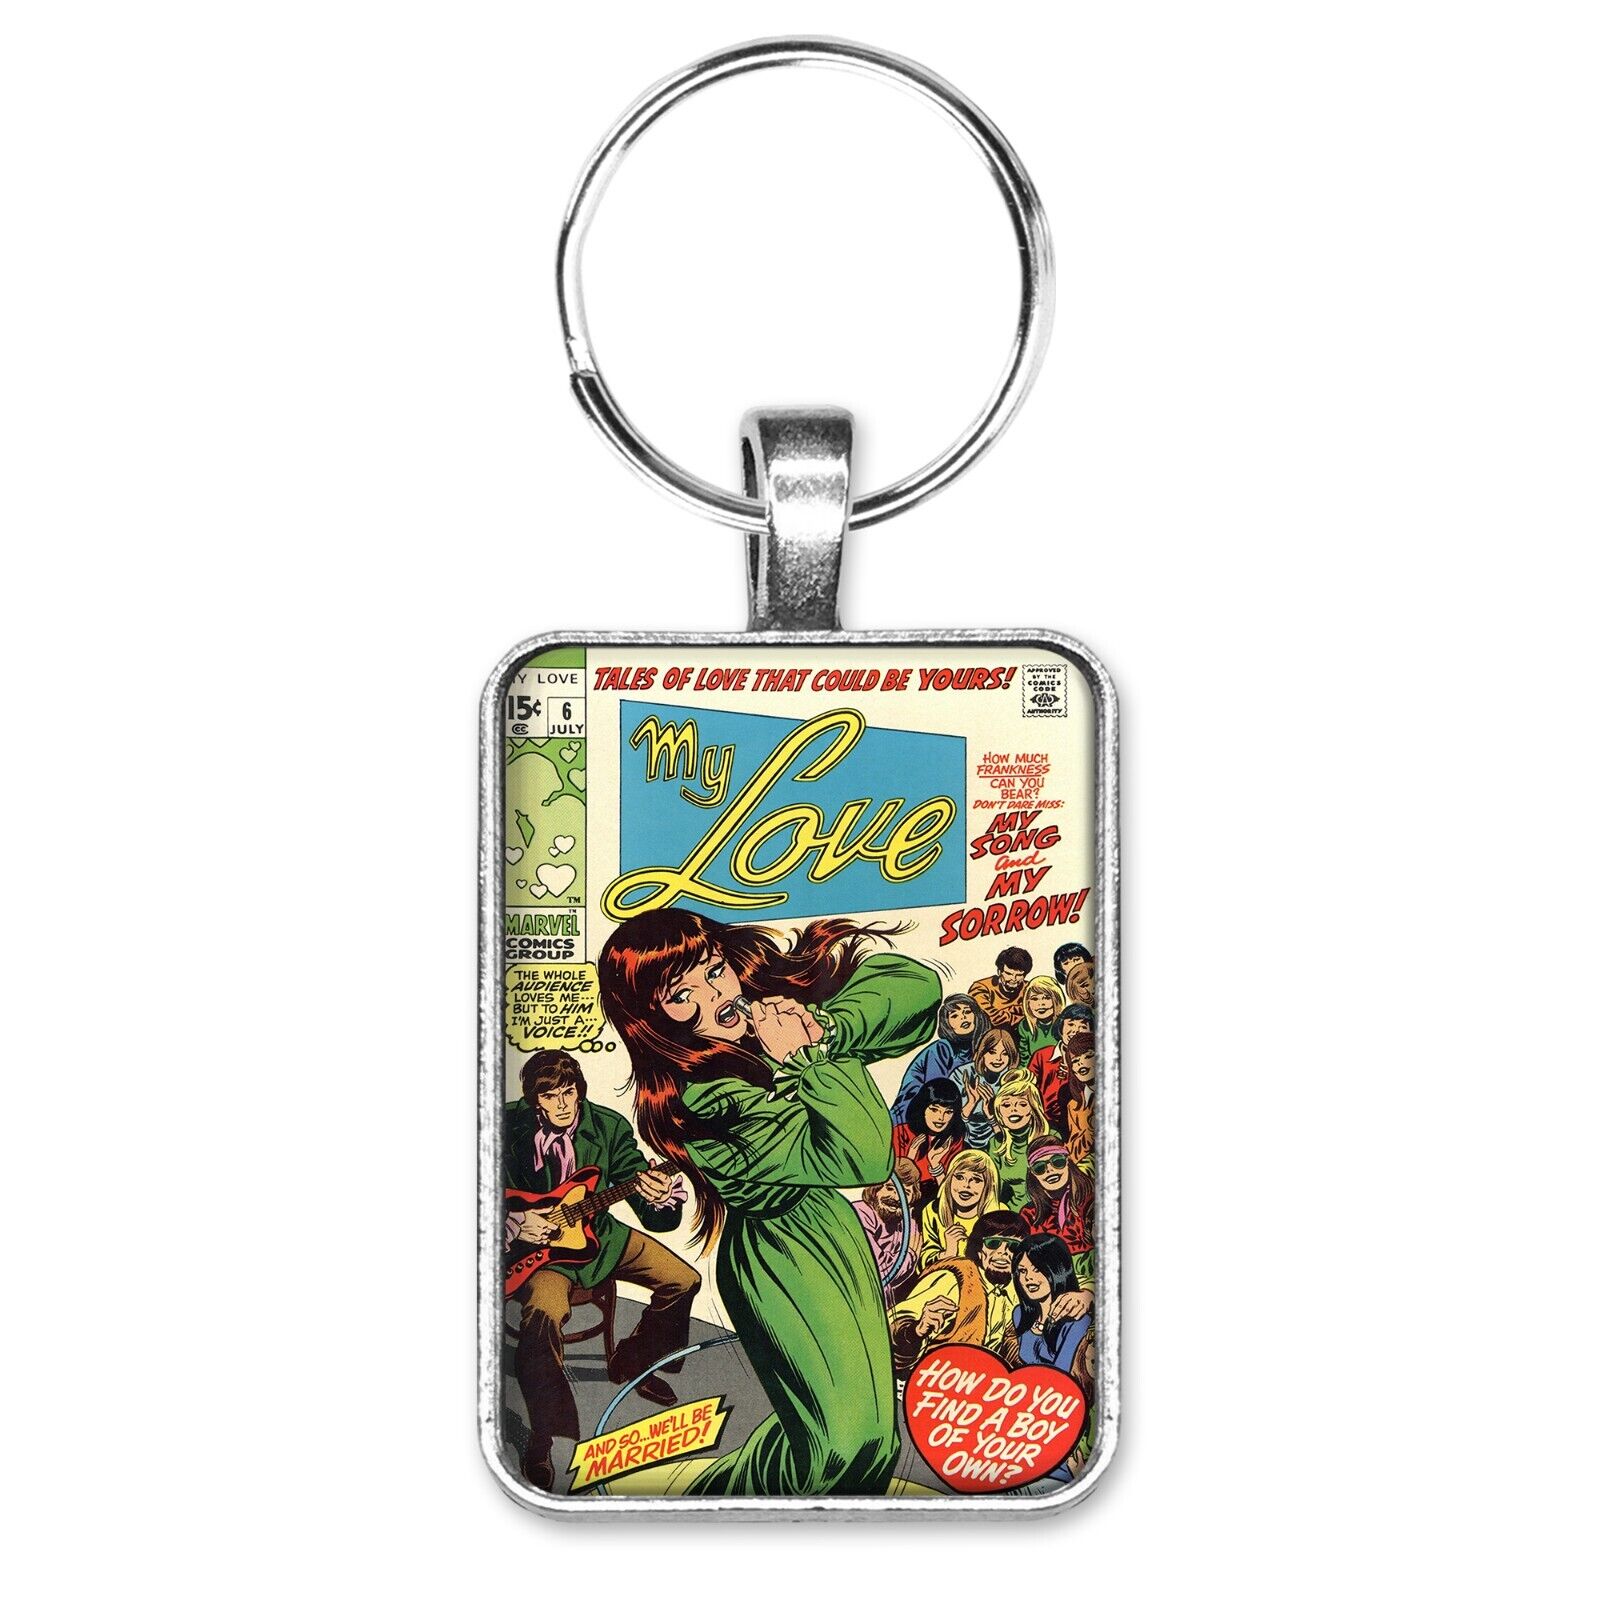 My Love #6 Cover Key Ring or Necklace Classic Romance Comic Book Jewelry